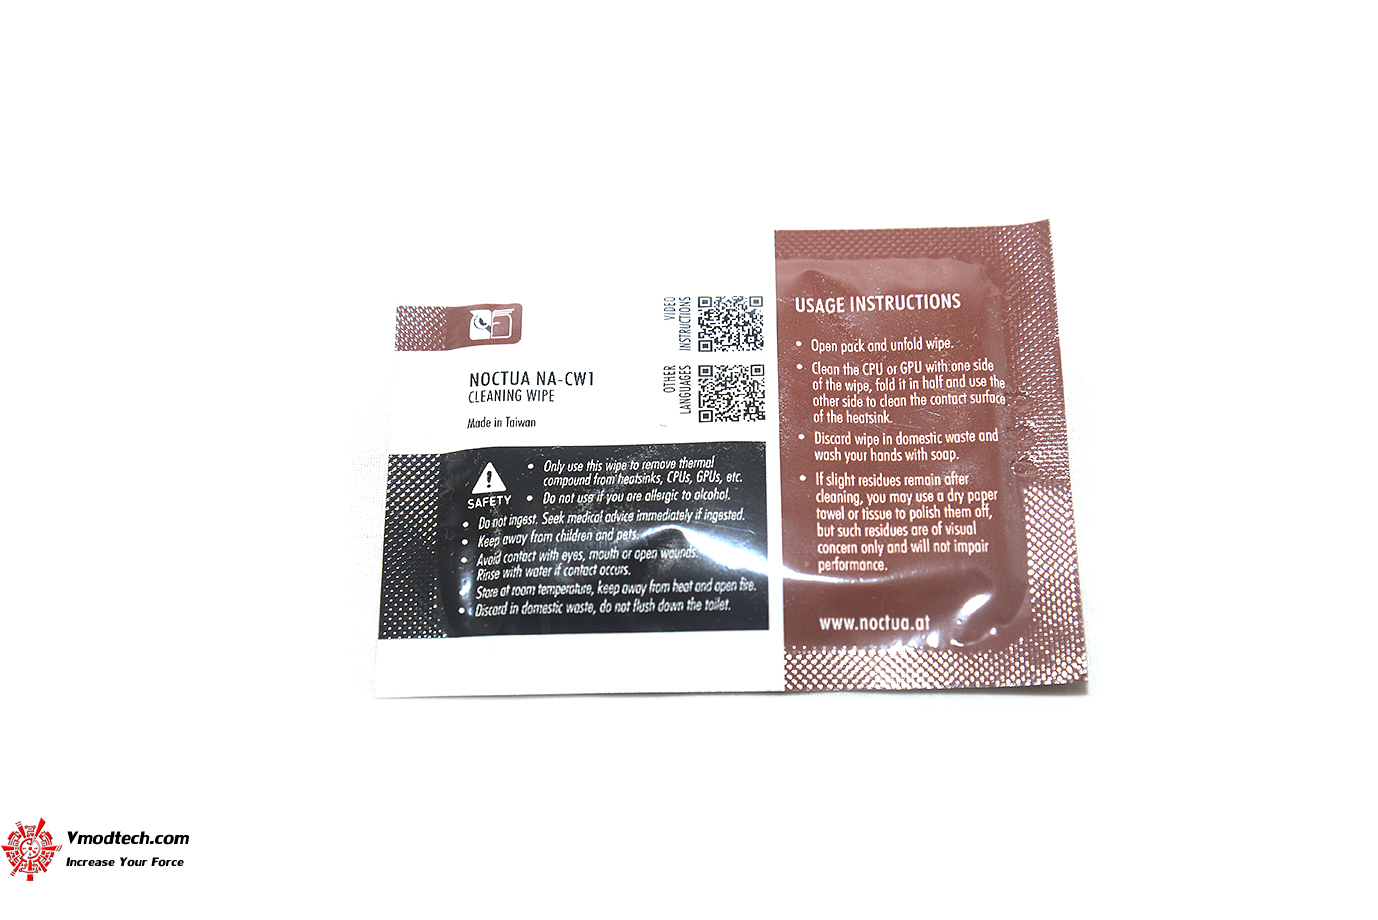 dsc 5026 NOCTUA NA SCW1 CLEANING WIPES REVIEW